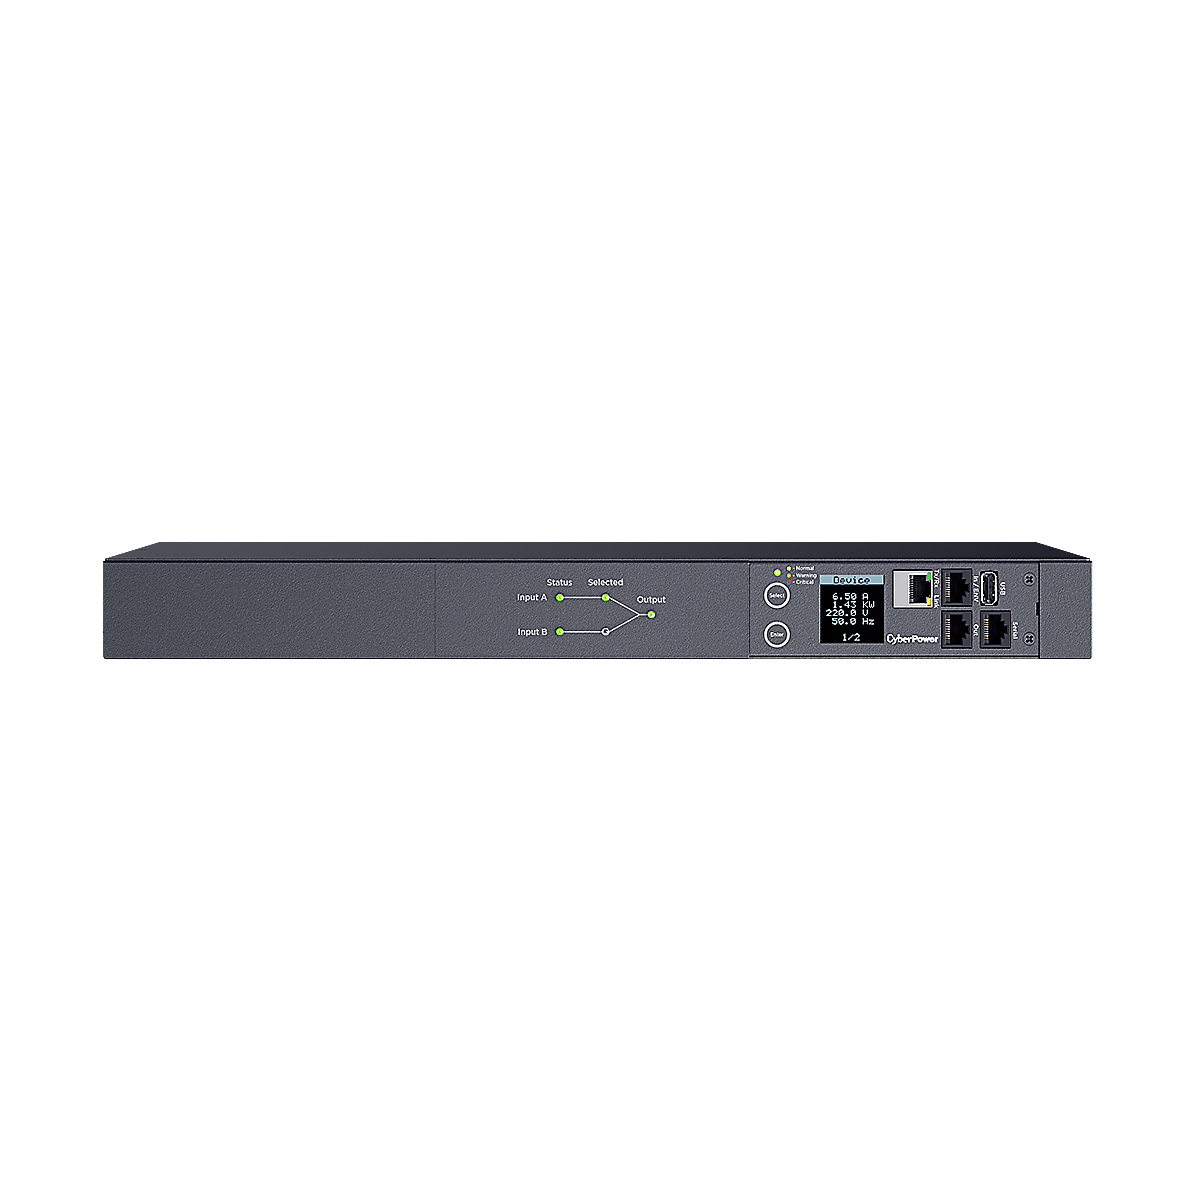 CyberPower Systems Power Distribution Unit - PDU44004